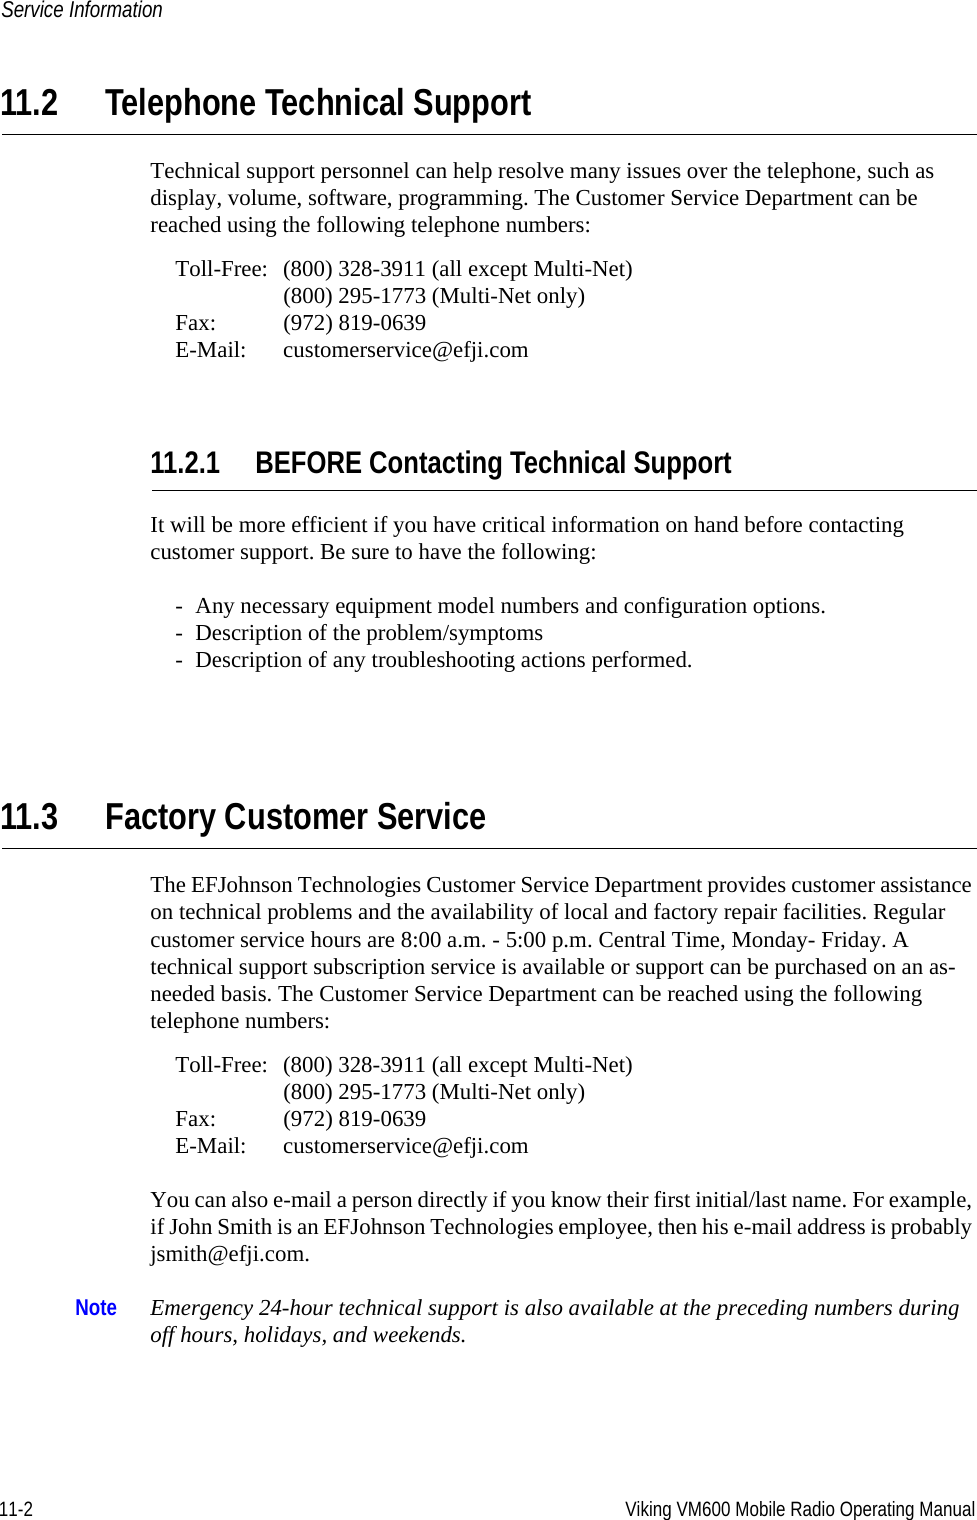 11-2 Viking VM600 Mobile Radio Operating ManualService Information11.2 Telephone Technical SupportTechnical support personnel can help resolve many issues over the telephone, such as display, volume, software, programming. The Customer Service Department can be reached using the following telephone numbers:Toll-Free: (800) 328-3911 (all except Multi-Net)(800) 295-1773 (Multi-Net only)Fax: (972) 819-0639E-Mail: customerservice@efji.com11.2.1 BEFORE Contacting Technical SupportIt will be more efficient if you have critical information on hand before contacting customer support. Be sure to have the following:- Any necessary equipment model numbers and configuration options.- Description of the problem/symptoms- Description of any troubleshooting actions performed.11.3 Factory Customer ServiceThe EFJohnson Technologies Customer Service Department provides customer assistance on technical problems and the availability of local and factory repair facilities. Regular customer service hours are 8:00 a.m. - 5:00 p.m. Central Time, Monday- Friday. A technical support subscription service is available or support can be purchased on an as-needed basis. The Customer Service Department can be reached using the following telephone numbers:Toll-Free: (800) 328-3911 (all except Multi-Net)(800) 295-1773 (Multi-Net only)Fax: (972) 819-0639E-Mail: customerservice@efji.comYou can also e-mail a person directly if you know their first initial/last name. For example, if John Smith is an EFJohnson Technologies employee, then his e-mail address is probably jsmith@efji.com.Note Emergency 24-hour technical support is also available at the preceding numbers during off hours, holidays, and weekends.Draft 4/29/2014